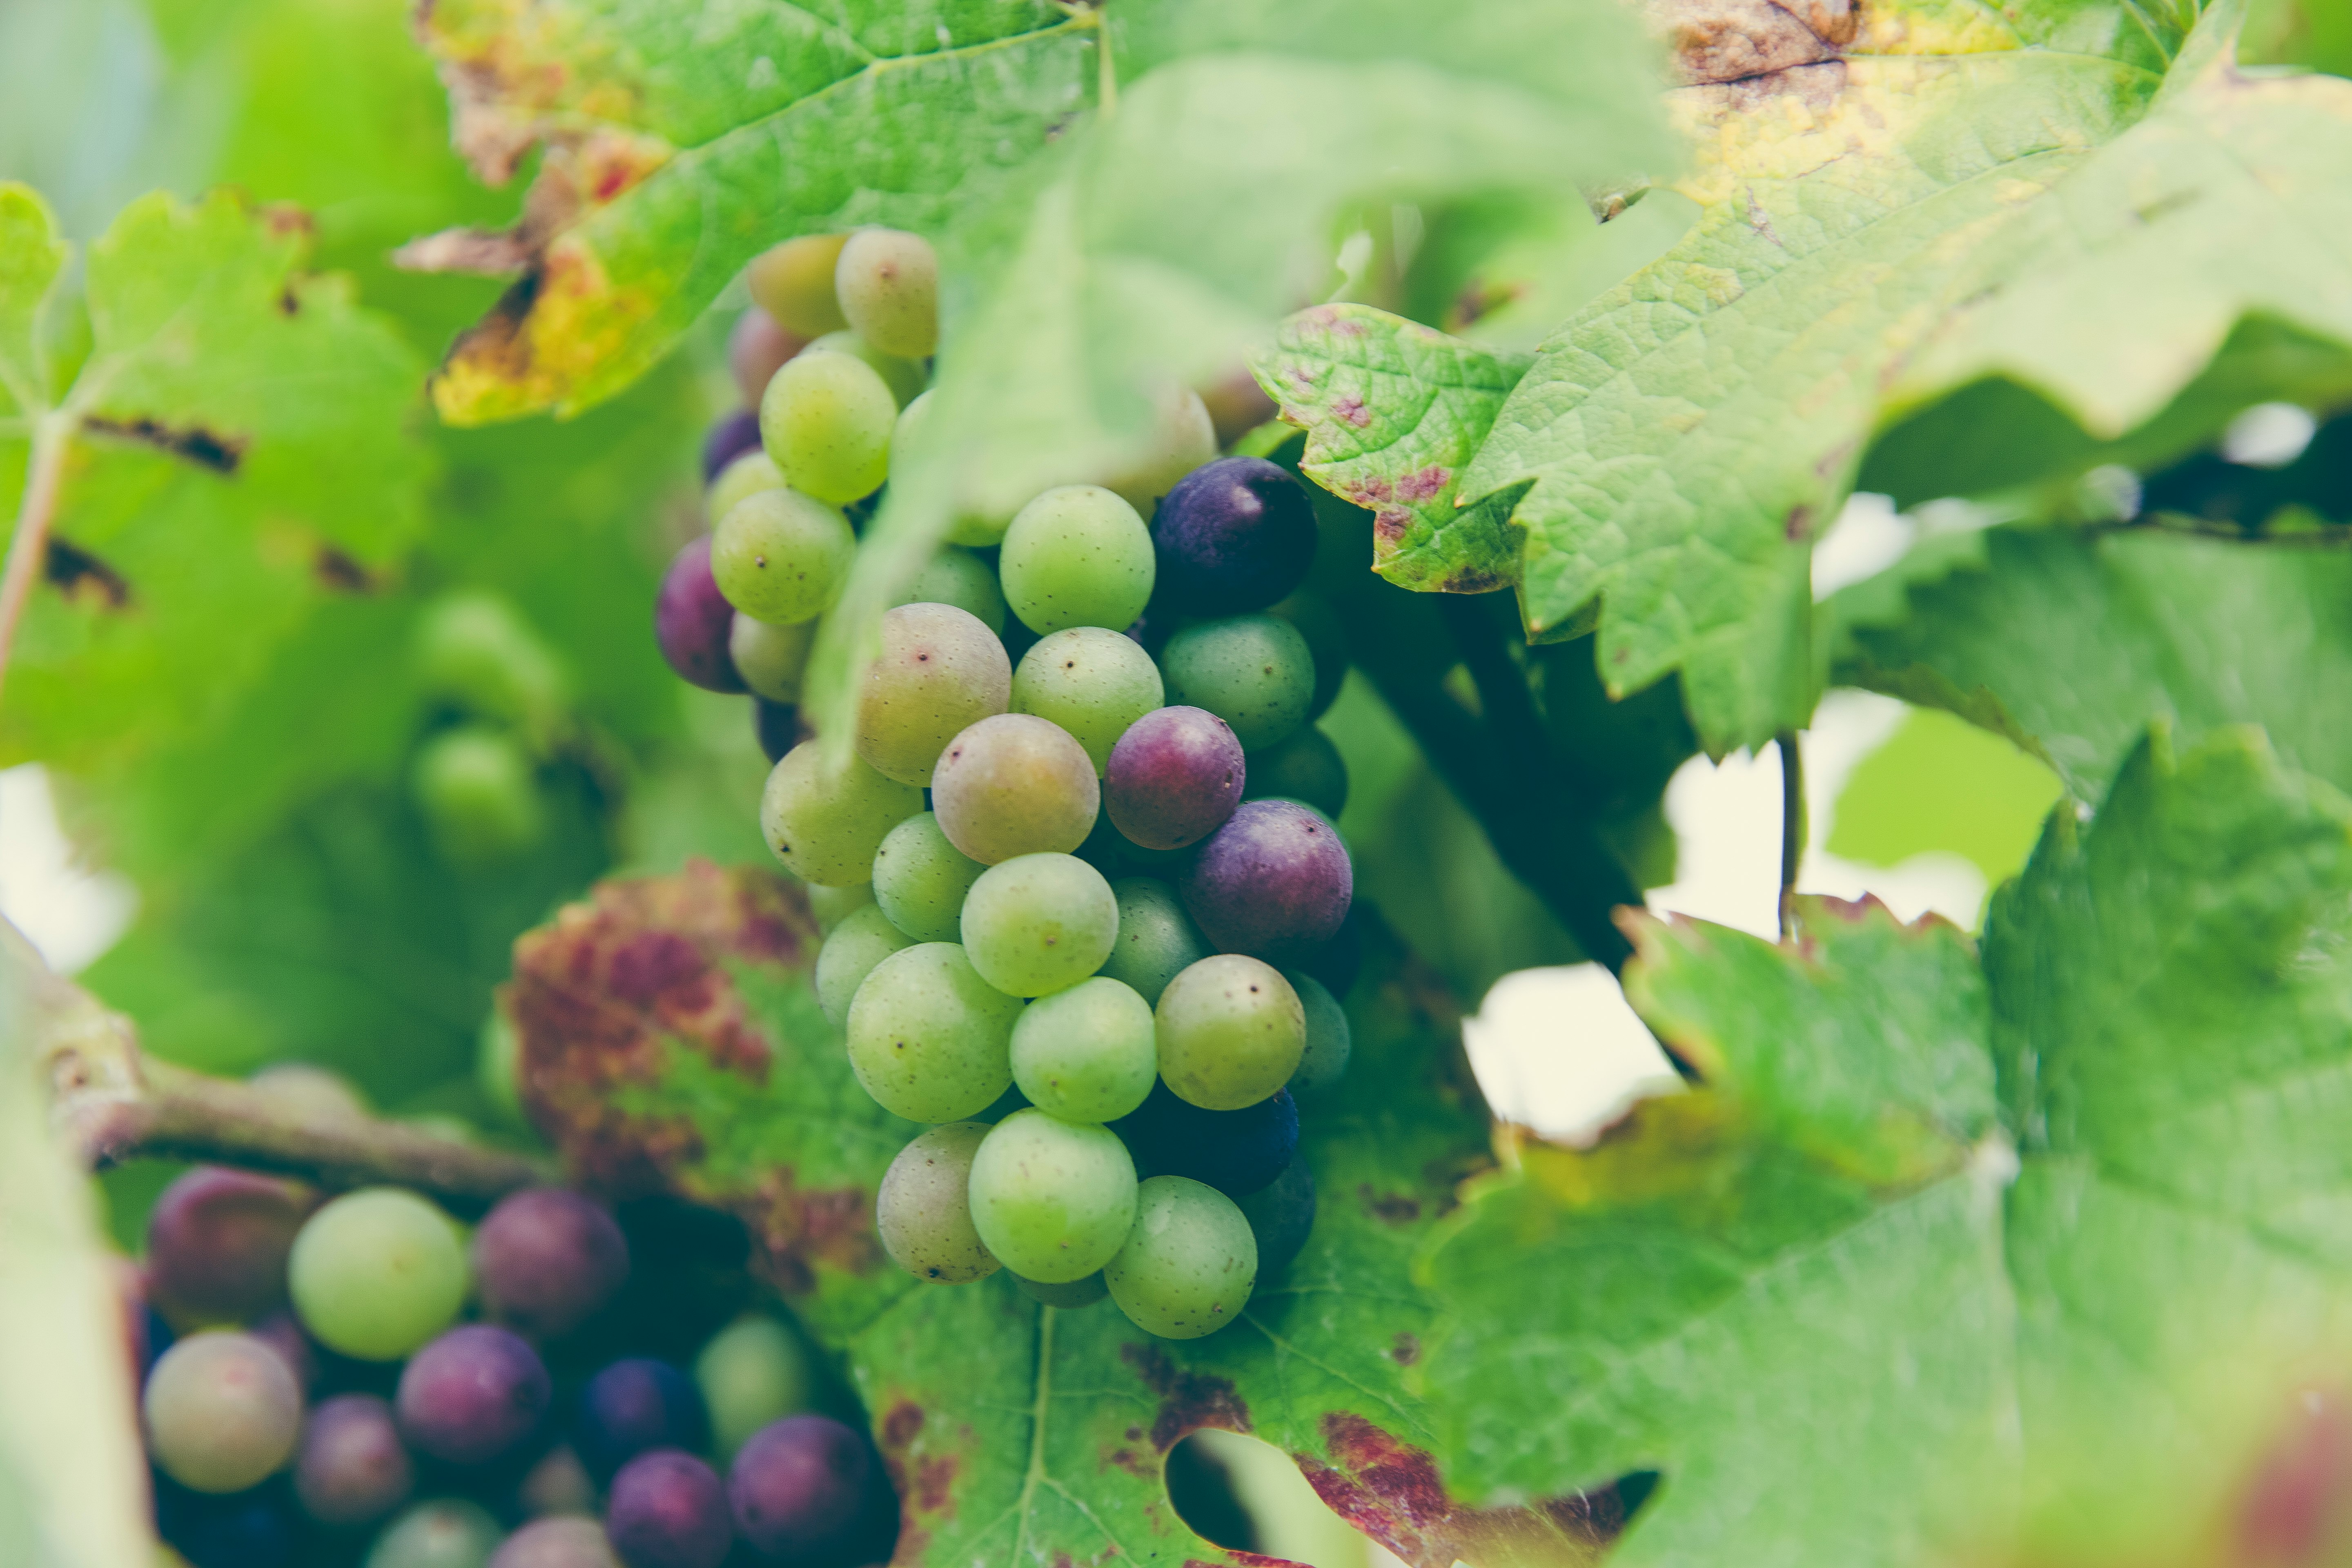 green and purple grapes hanging on vines